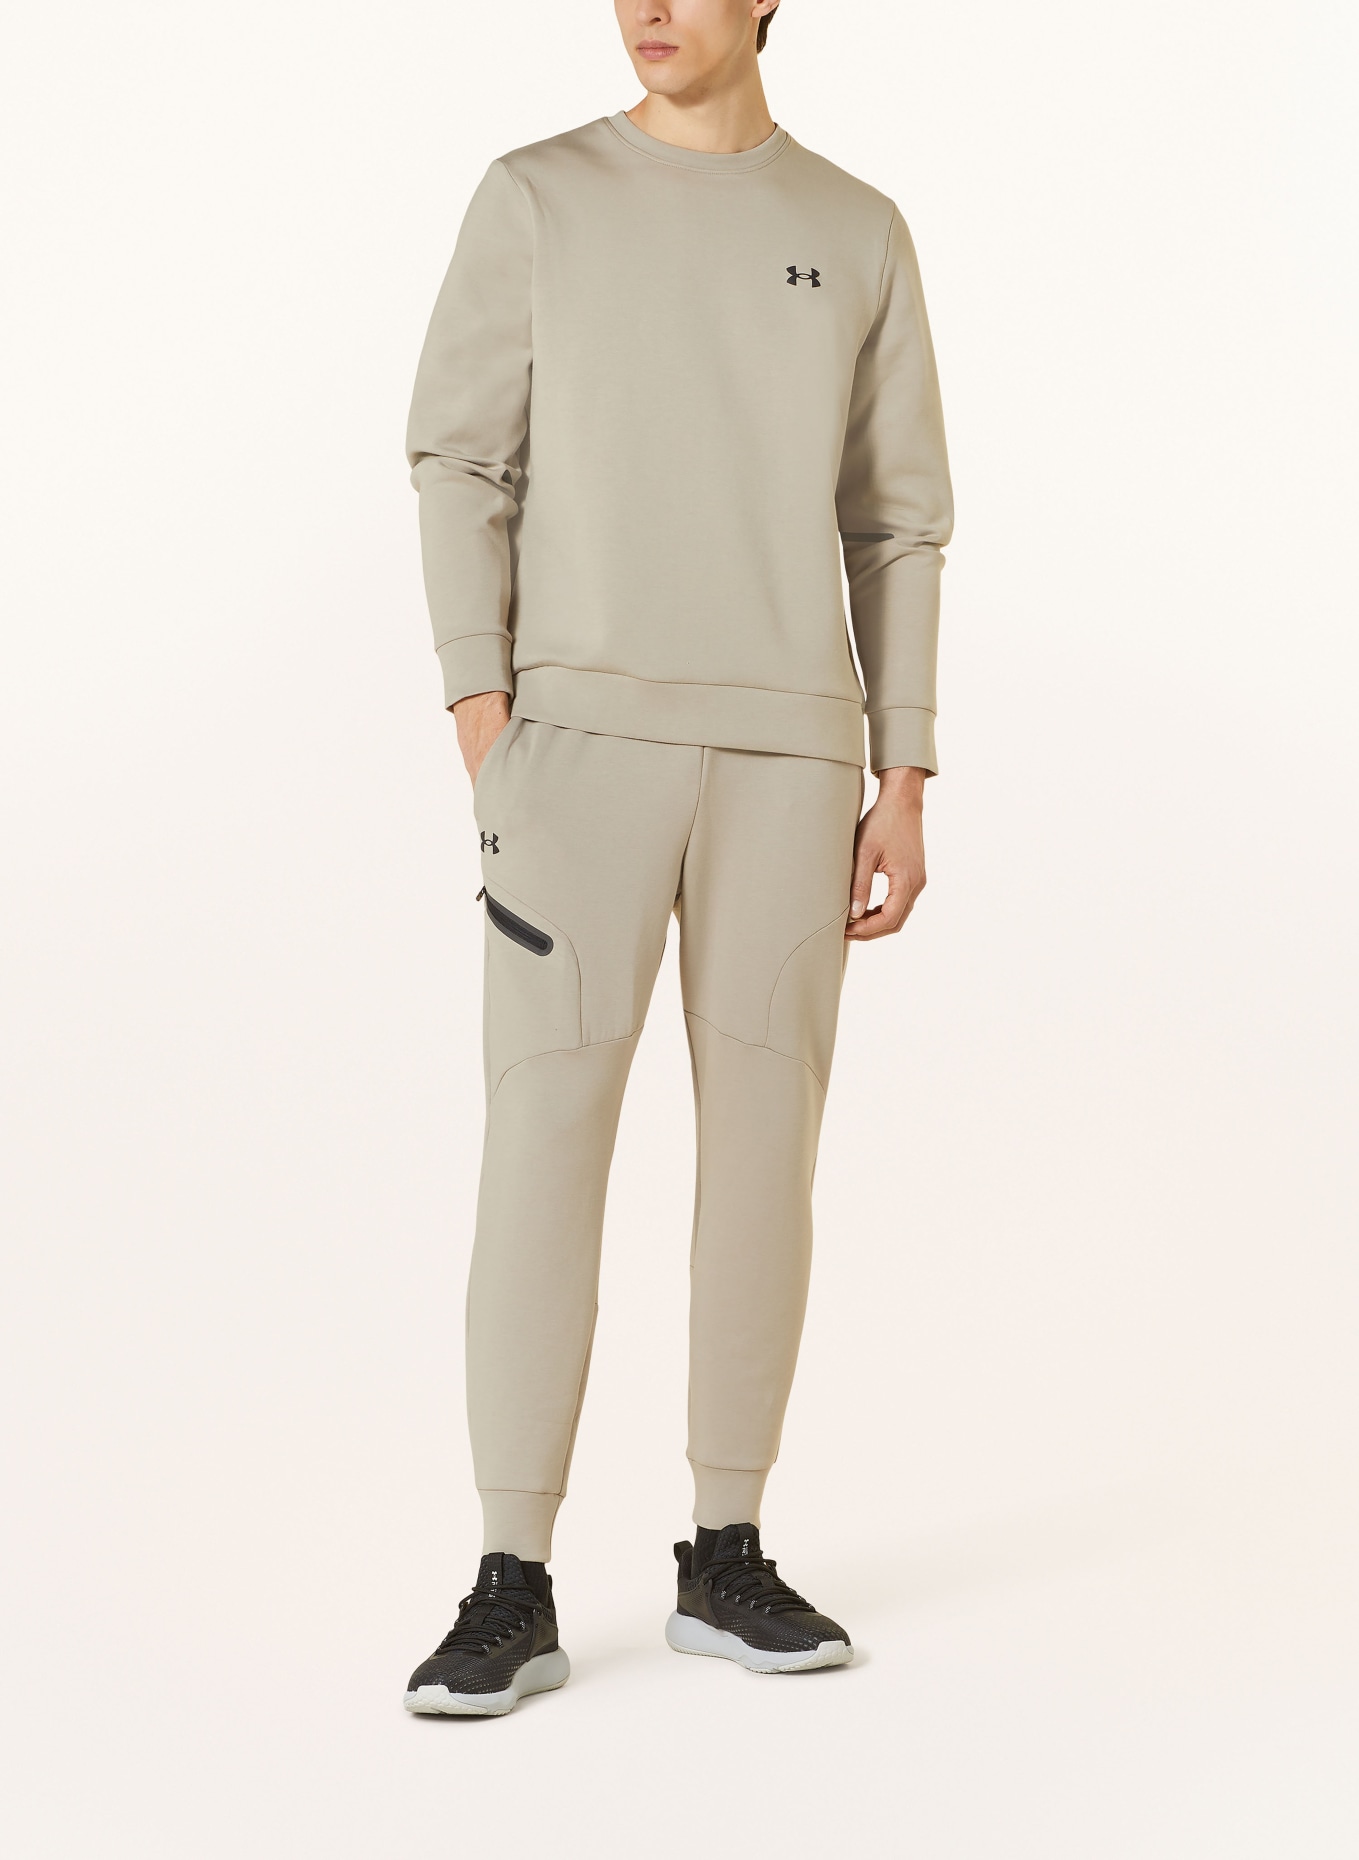 UNDER ARMOUR Sweatshirt UNSTOPPABLE, Farbe: TAUPE (Bild 2)